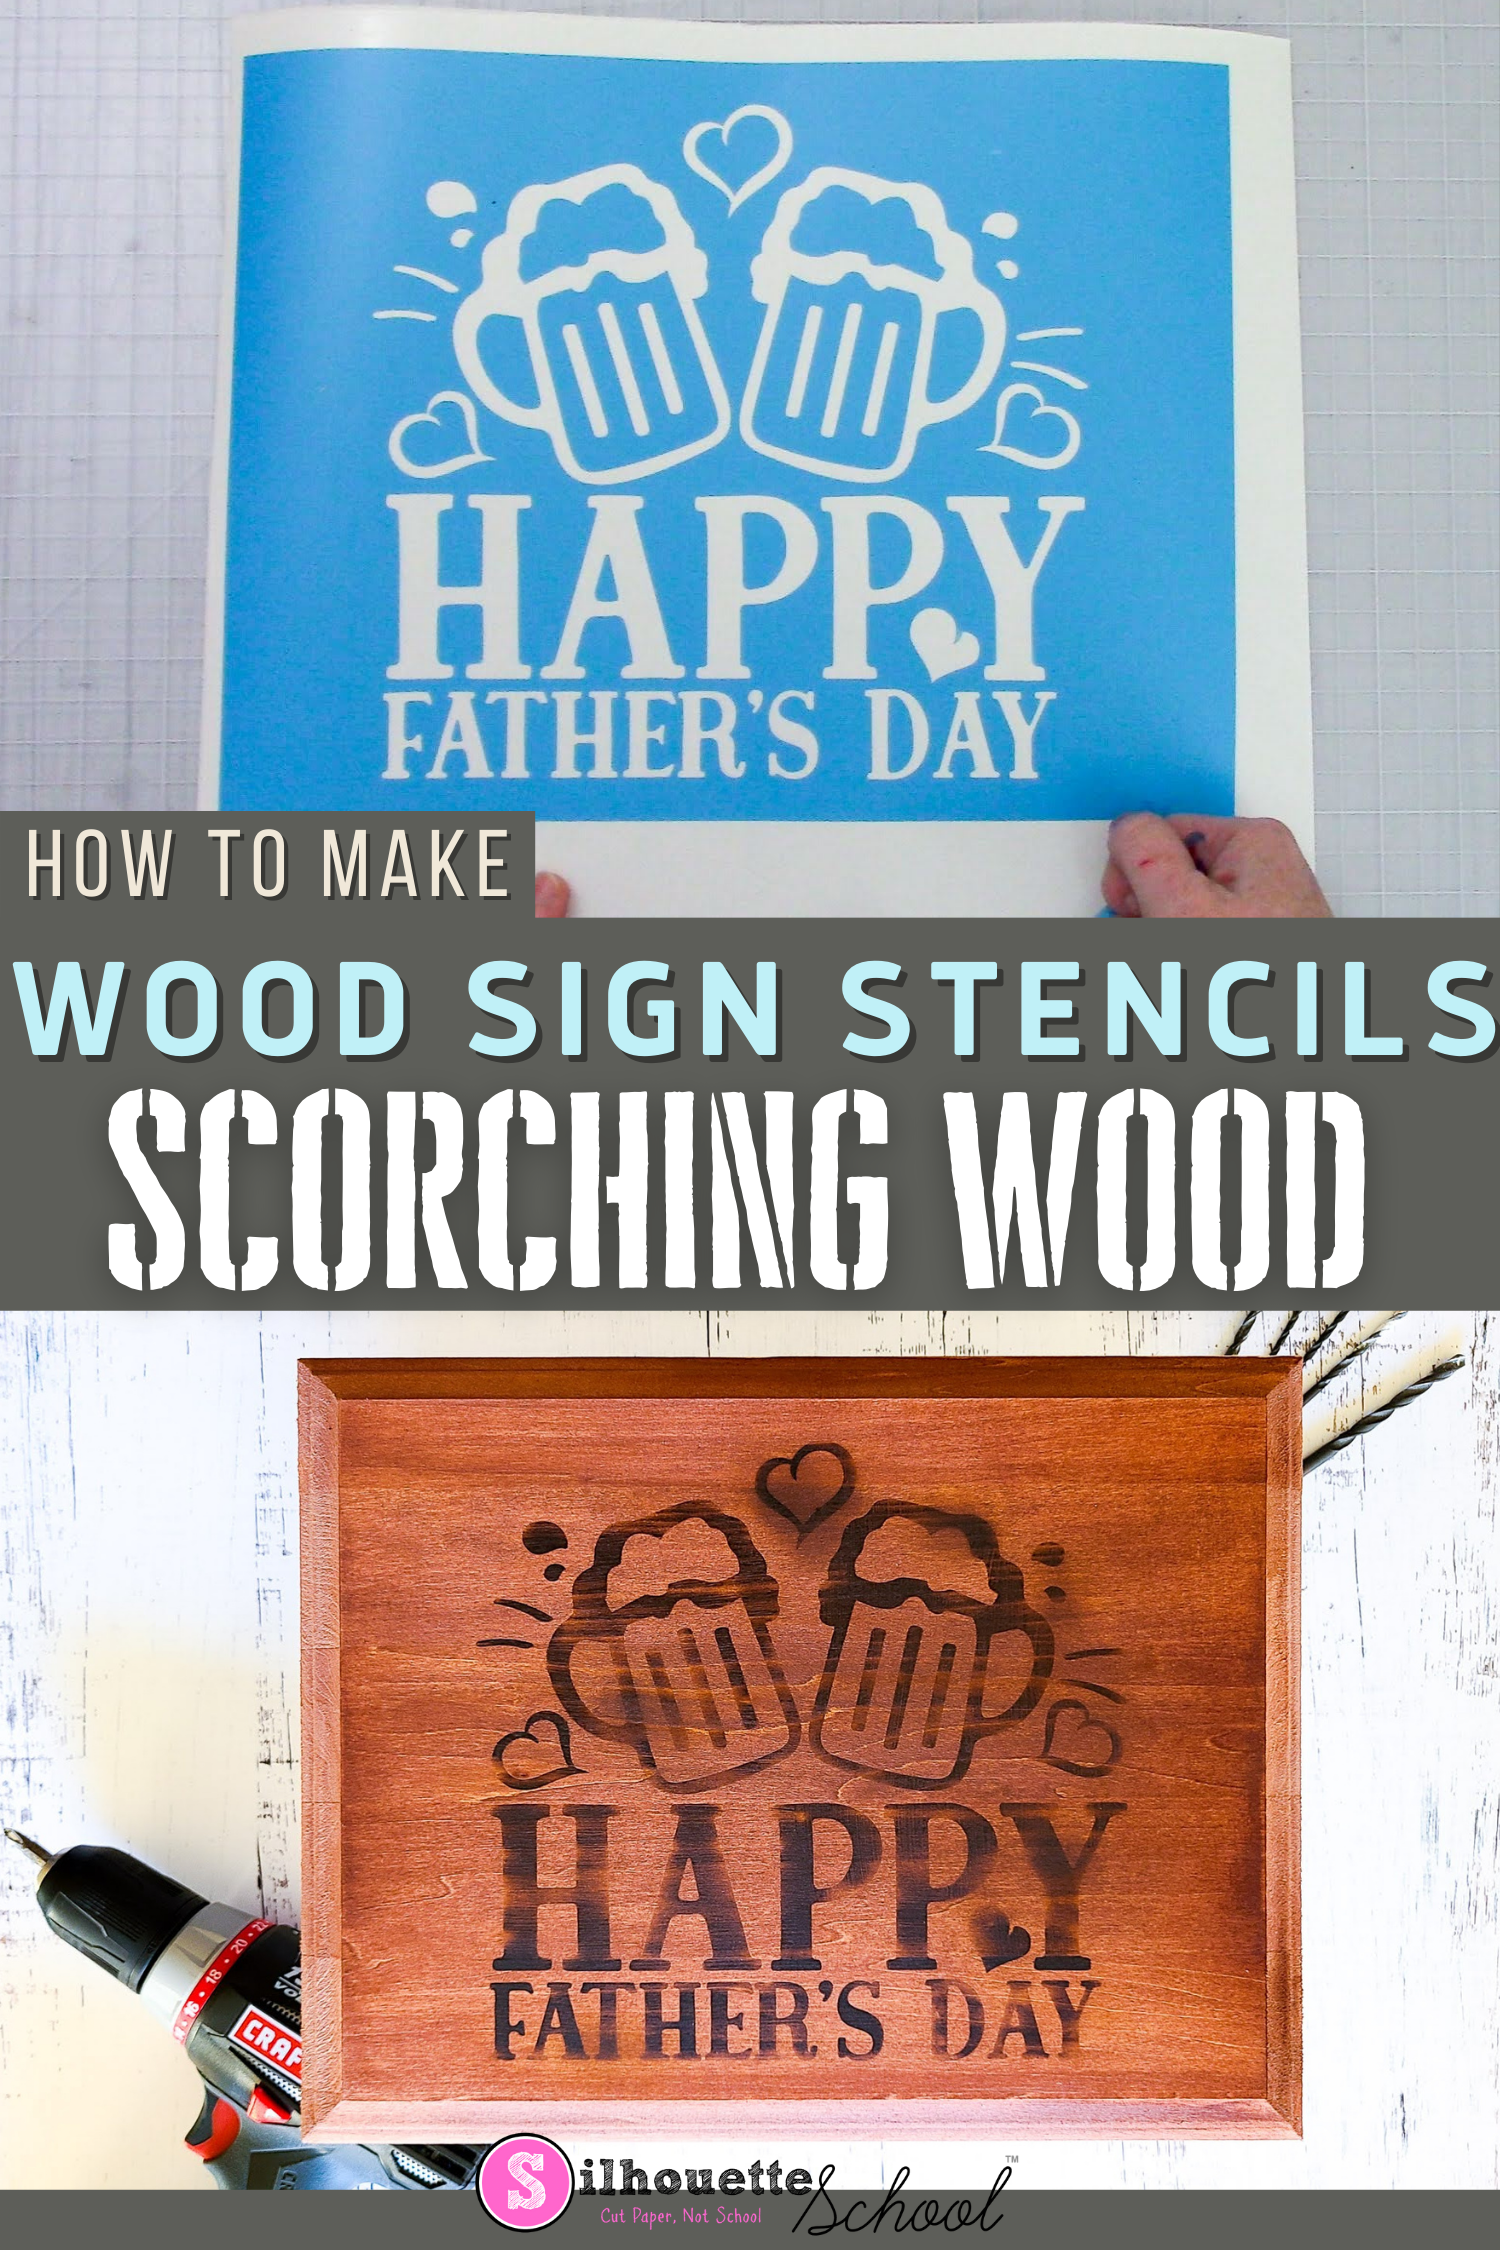 How to Use Decal Vinyl as a Wood Burning Stencil 